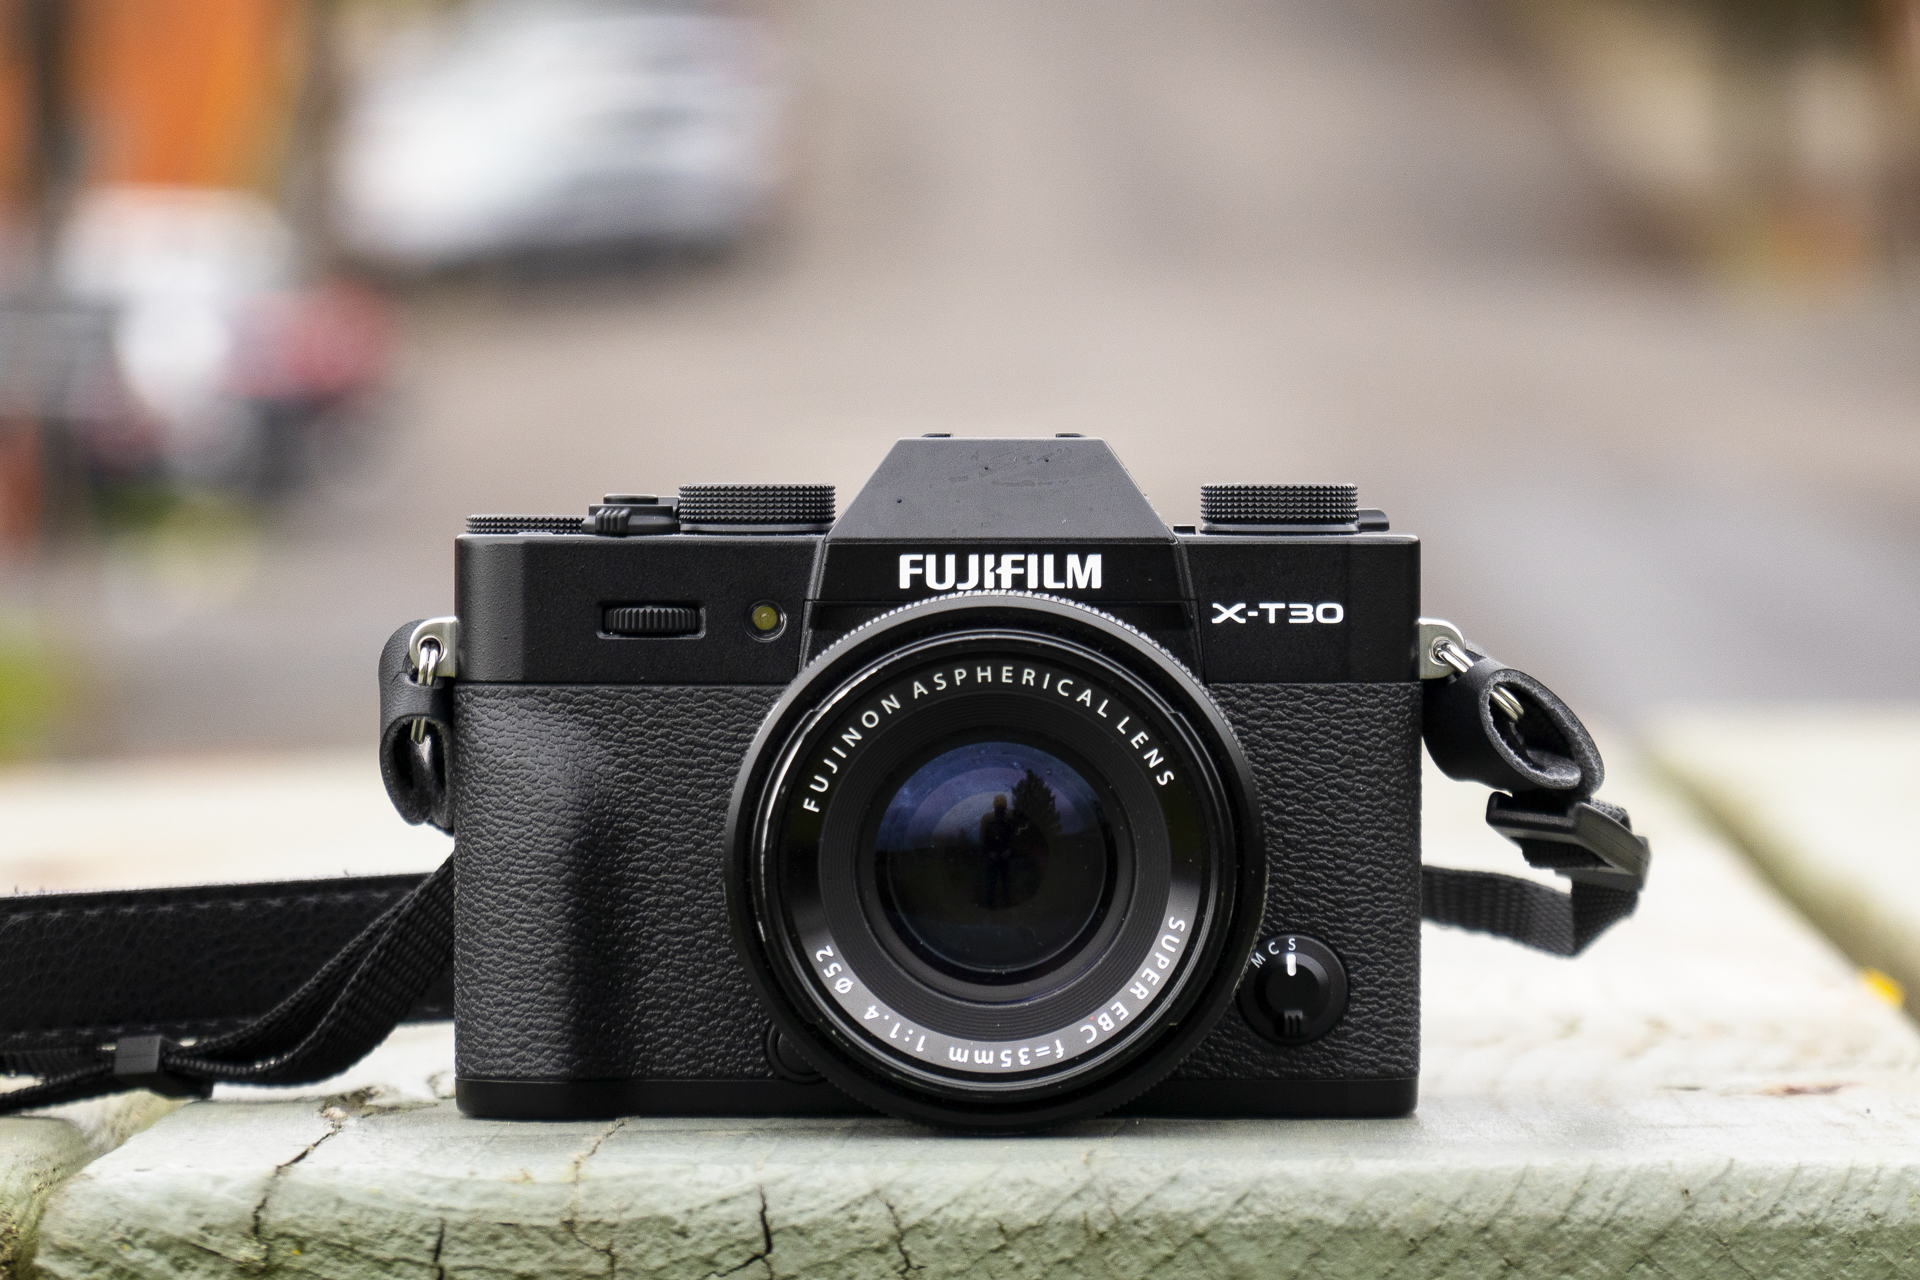 FUJIFILM X-T30 Mirrorless Camera with 35mm f/2 Lens and